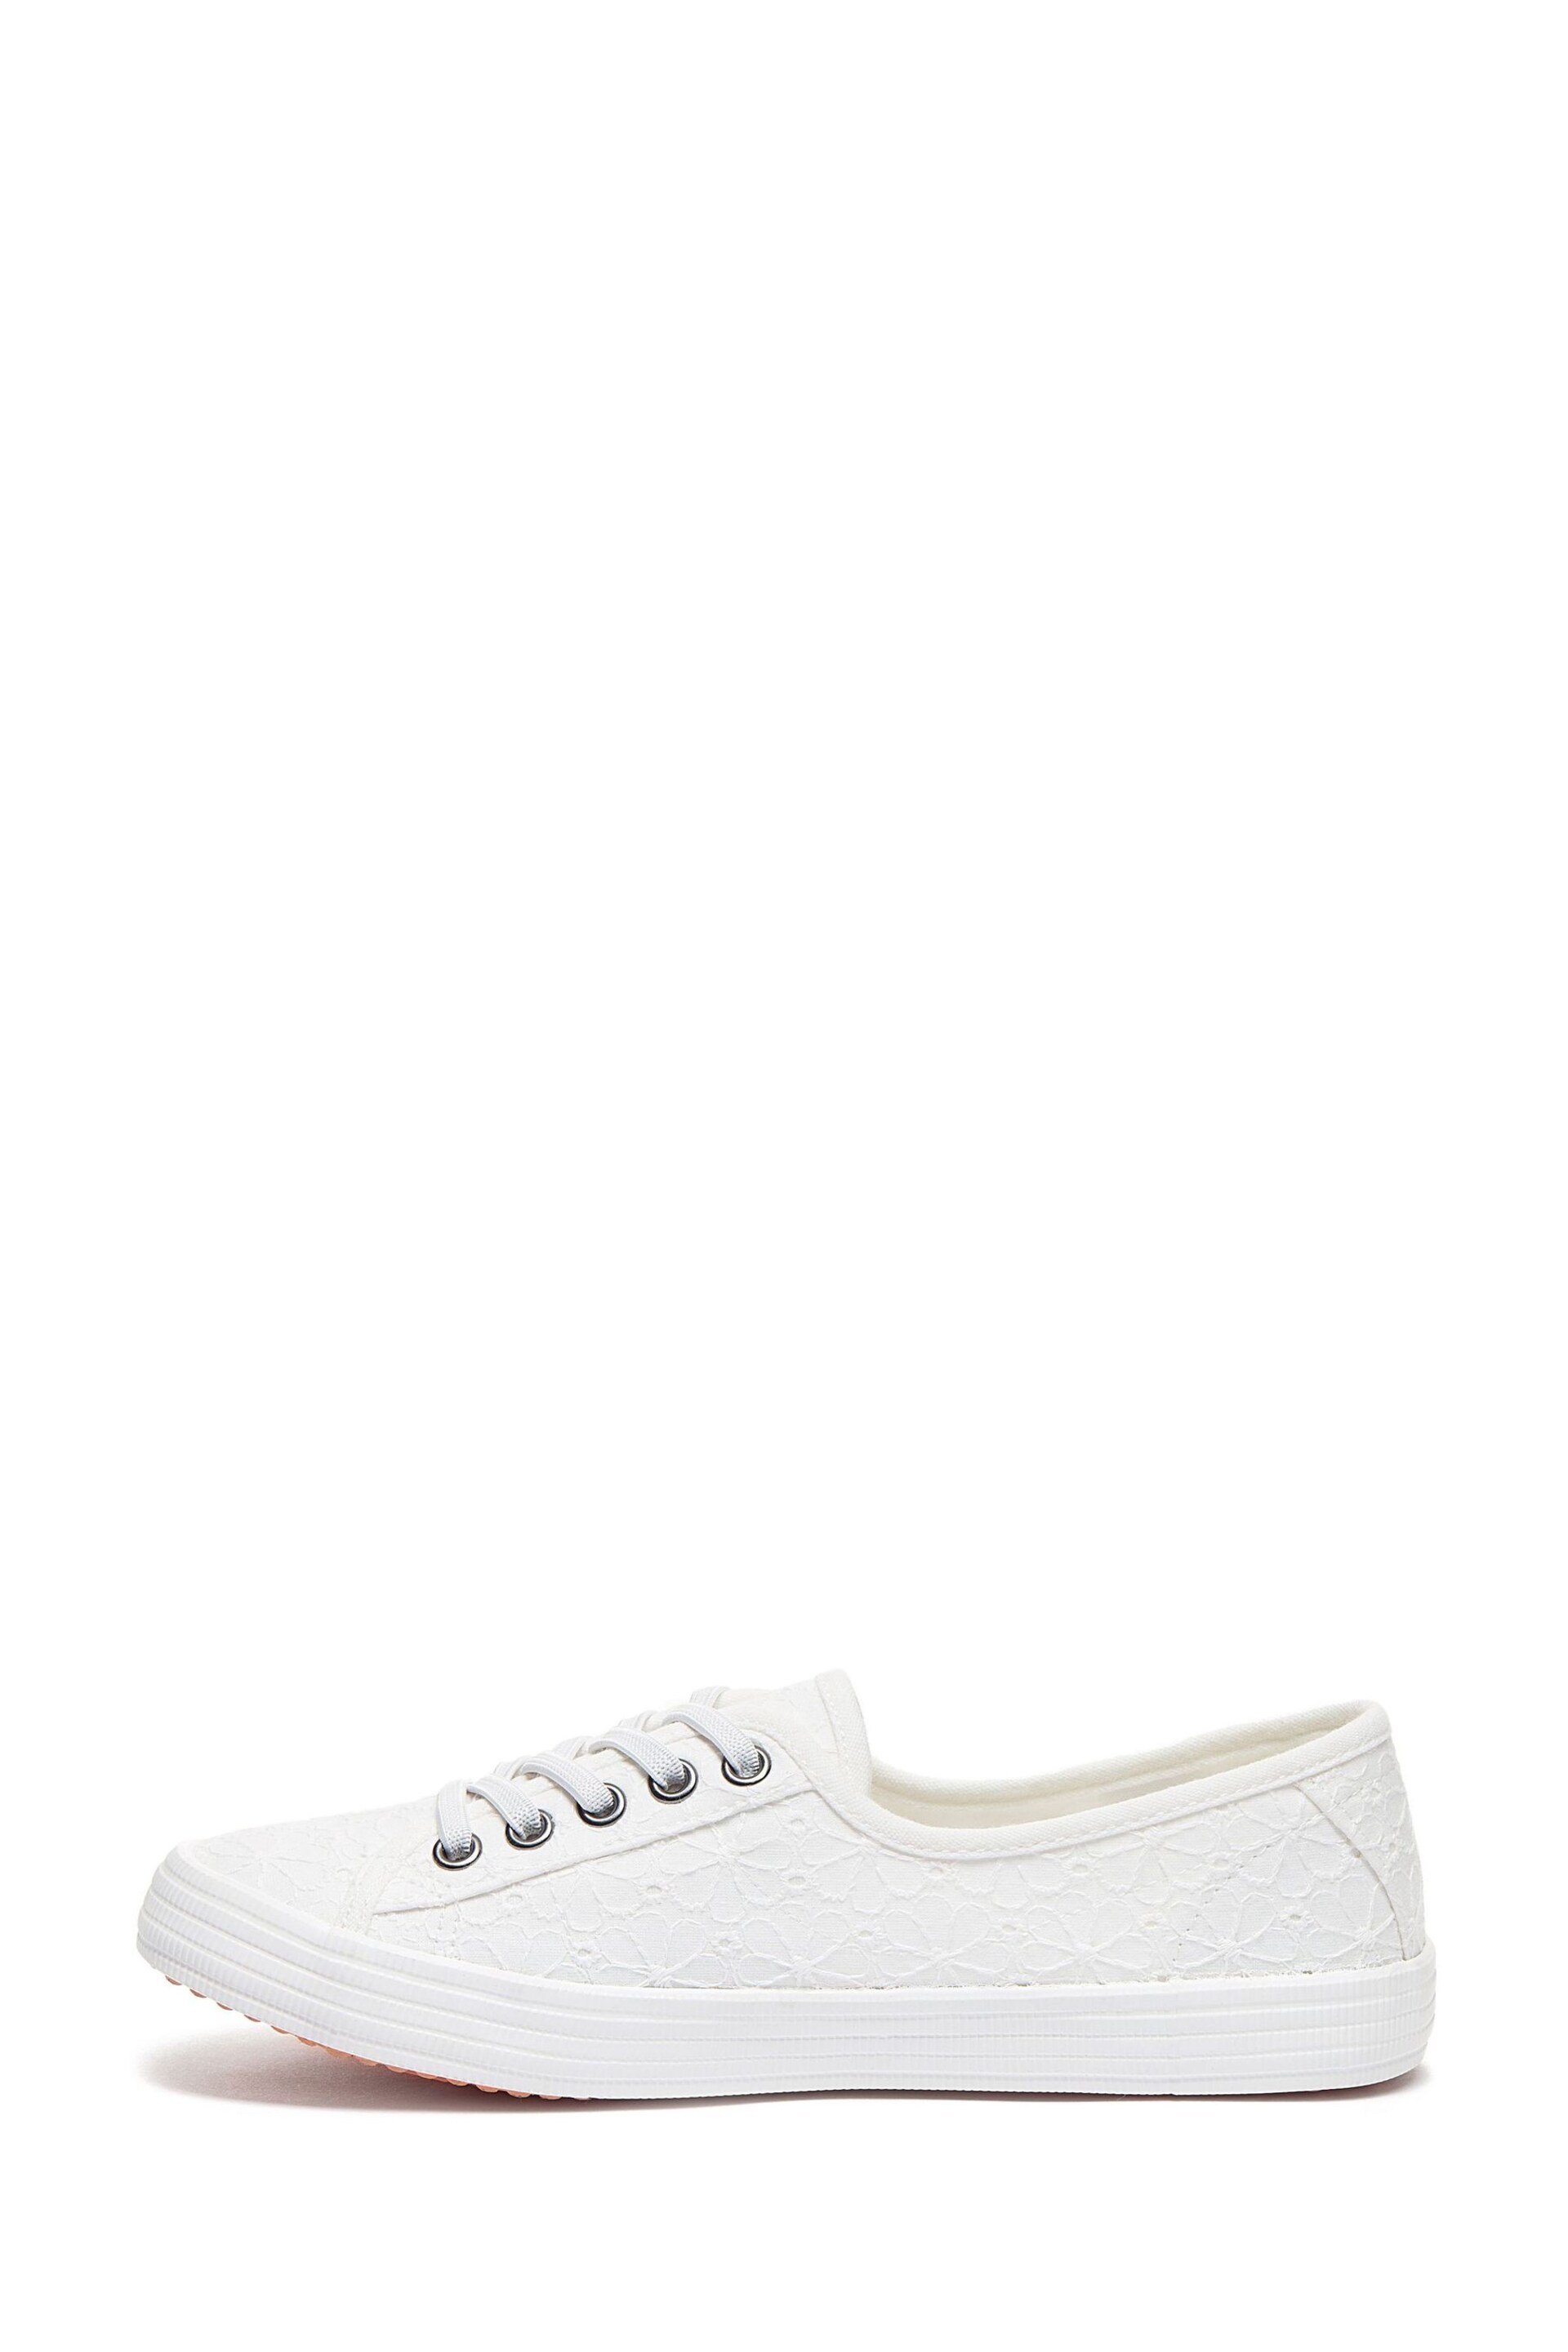 Rocket Dog Chow Chow Elsie Eyelet Cotton Trainers - Image 4 of 4